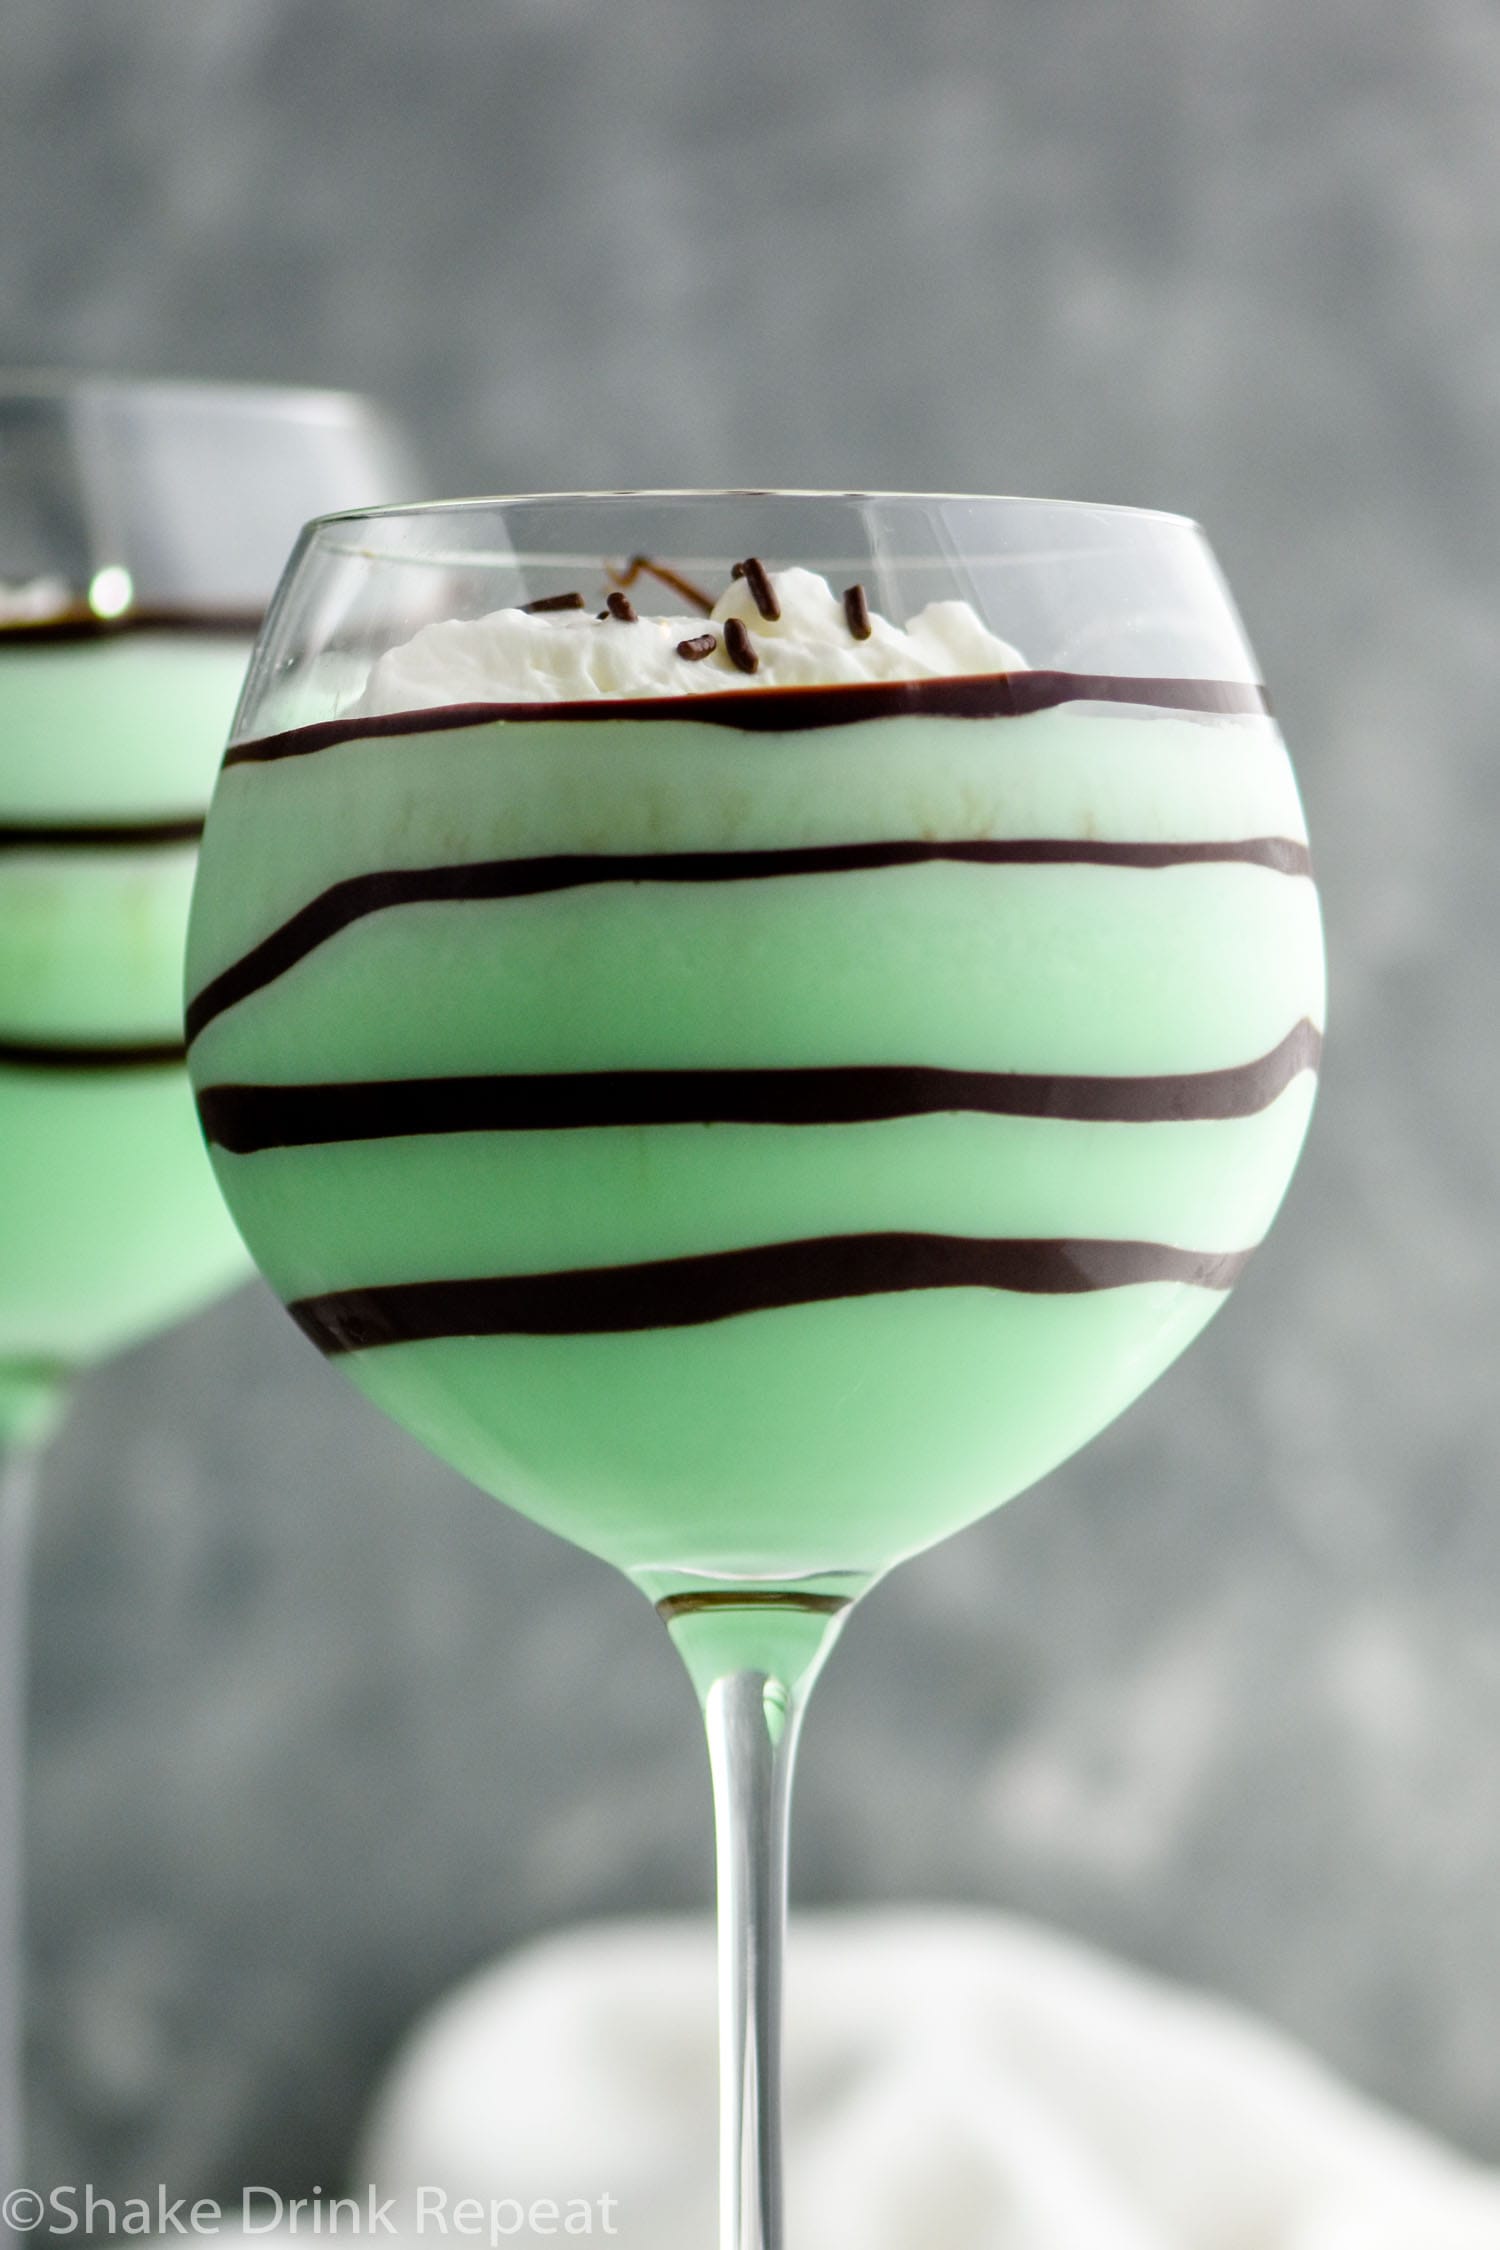 Grasshopper drink in glass with whipped cream and chocolate